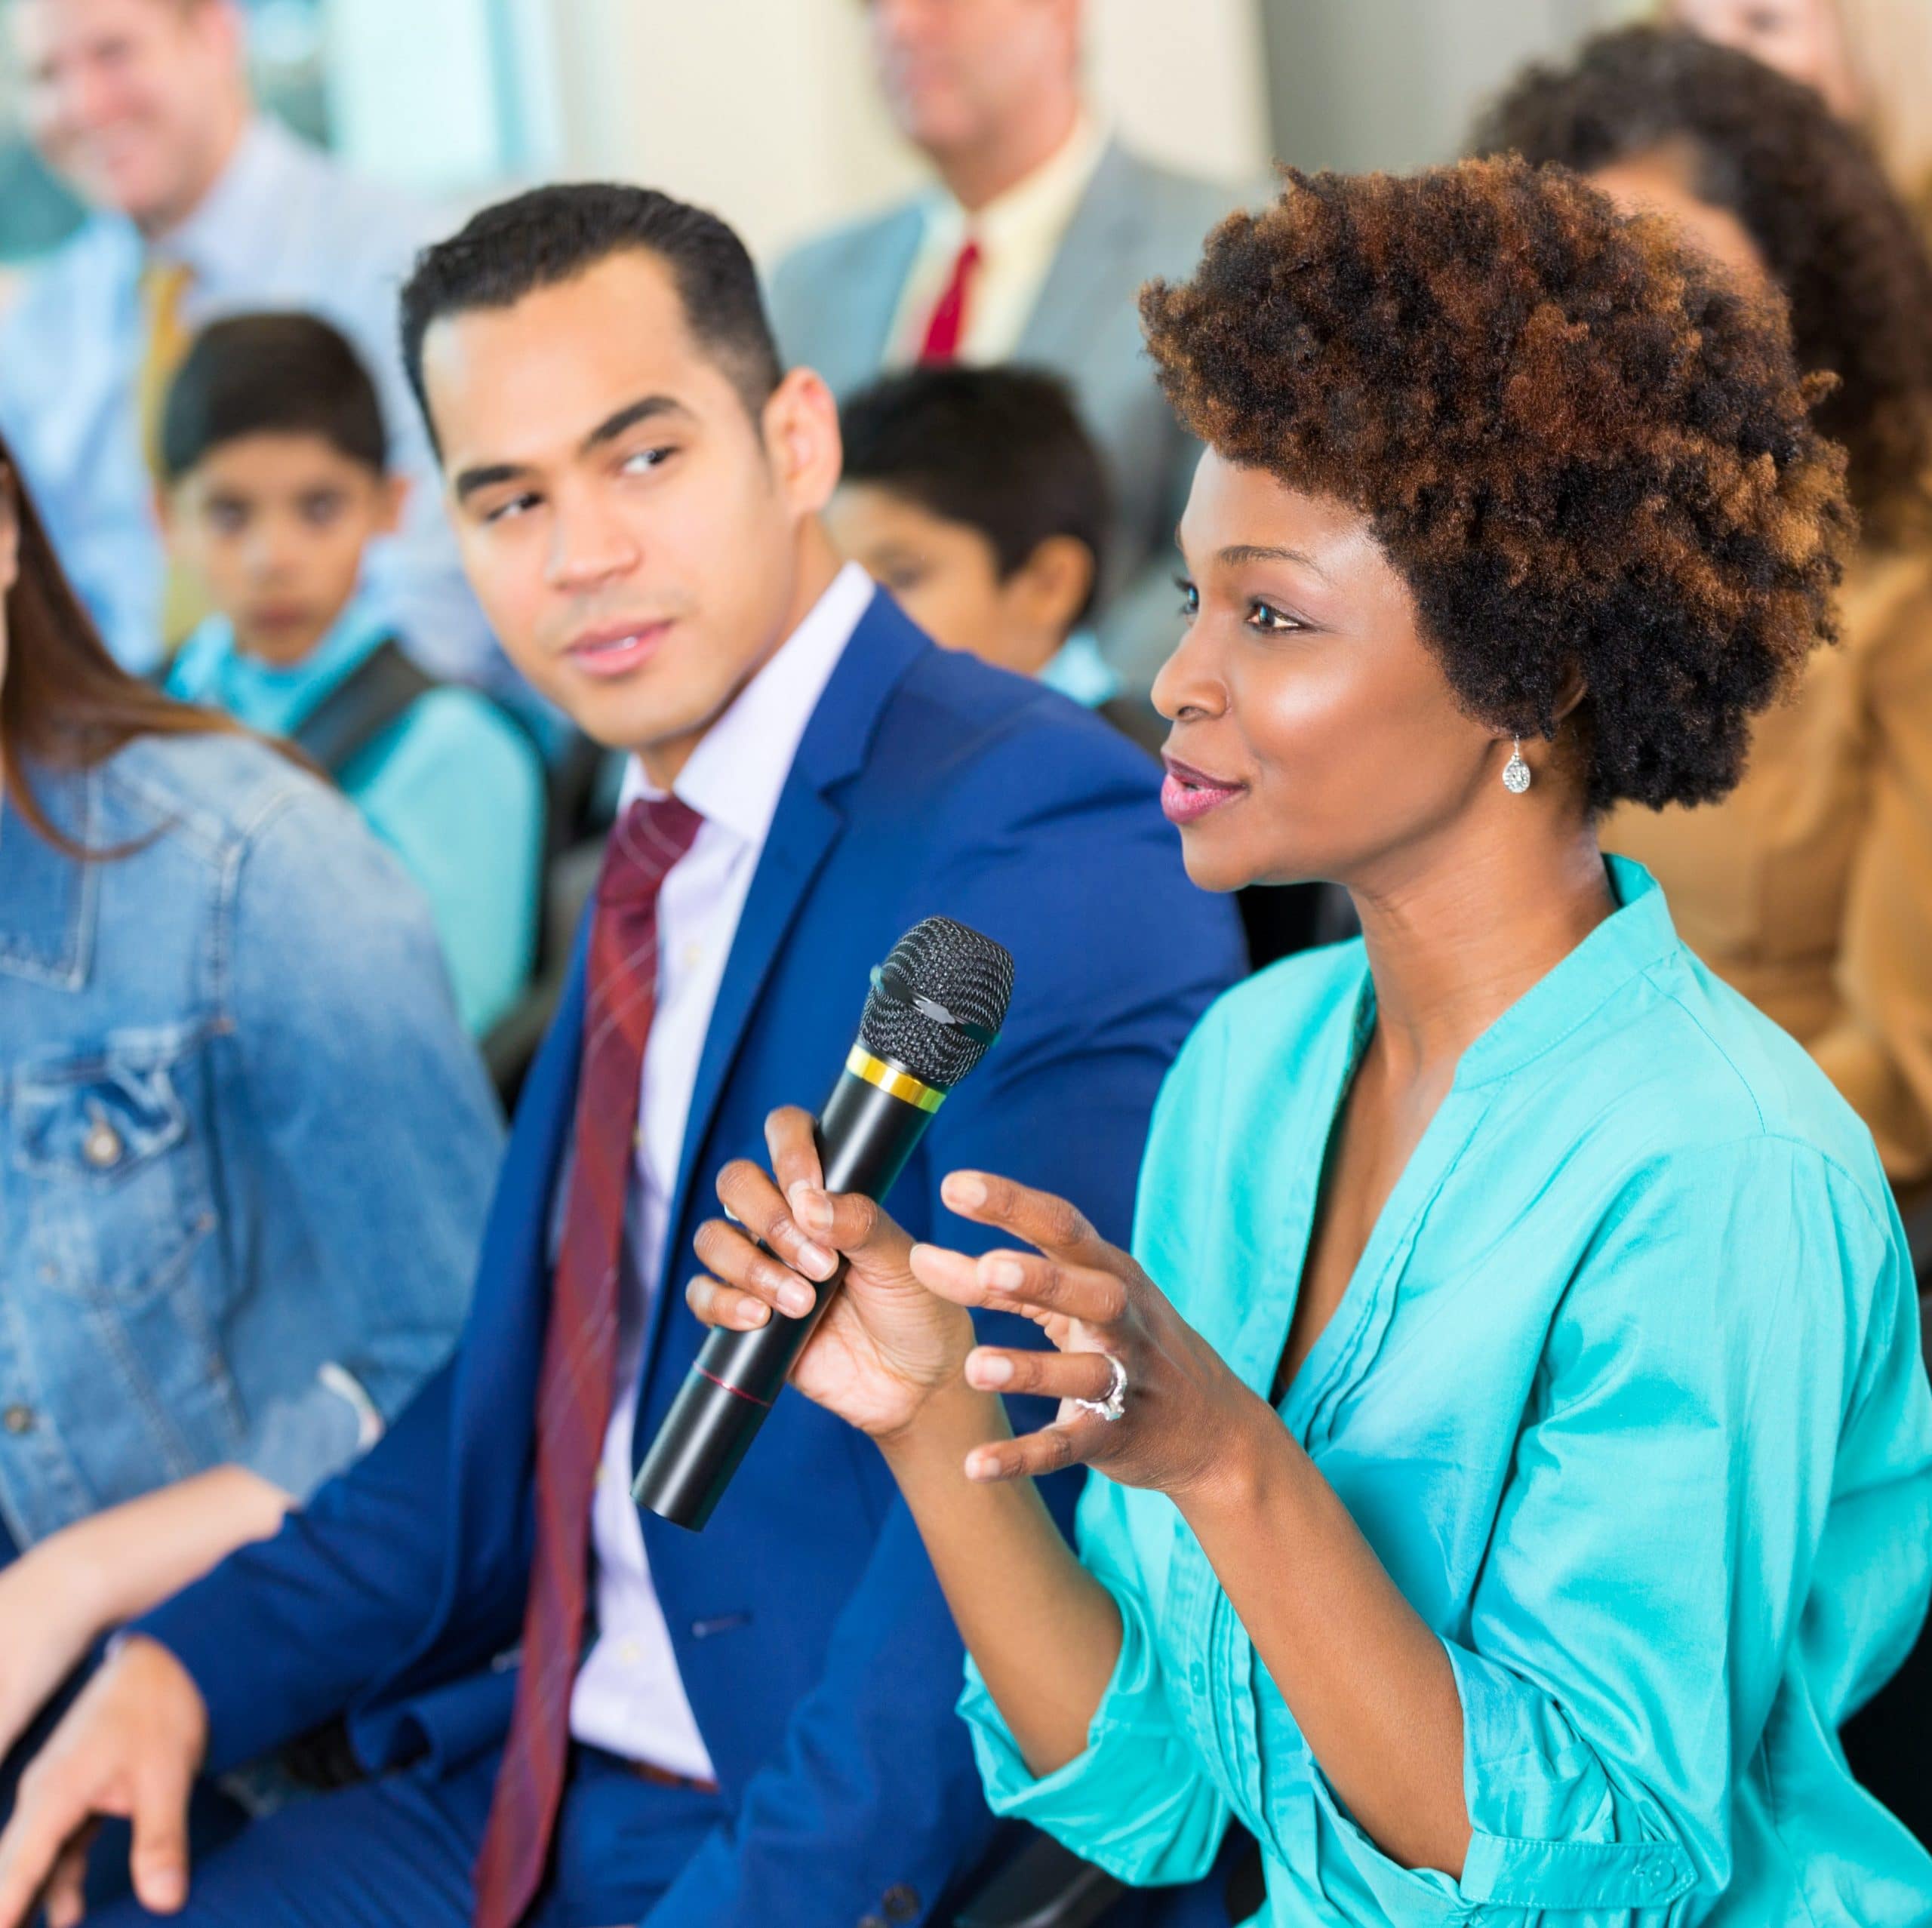 Confident woman asks question during a meeting. A diverse group of people are sitting with her in the audience.